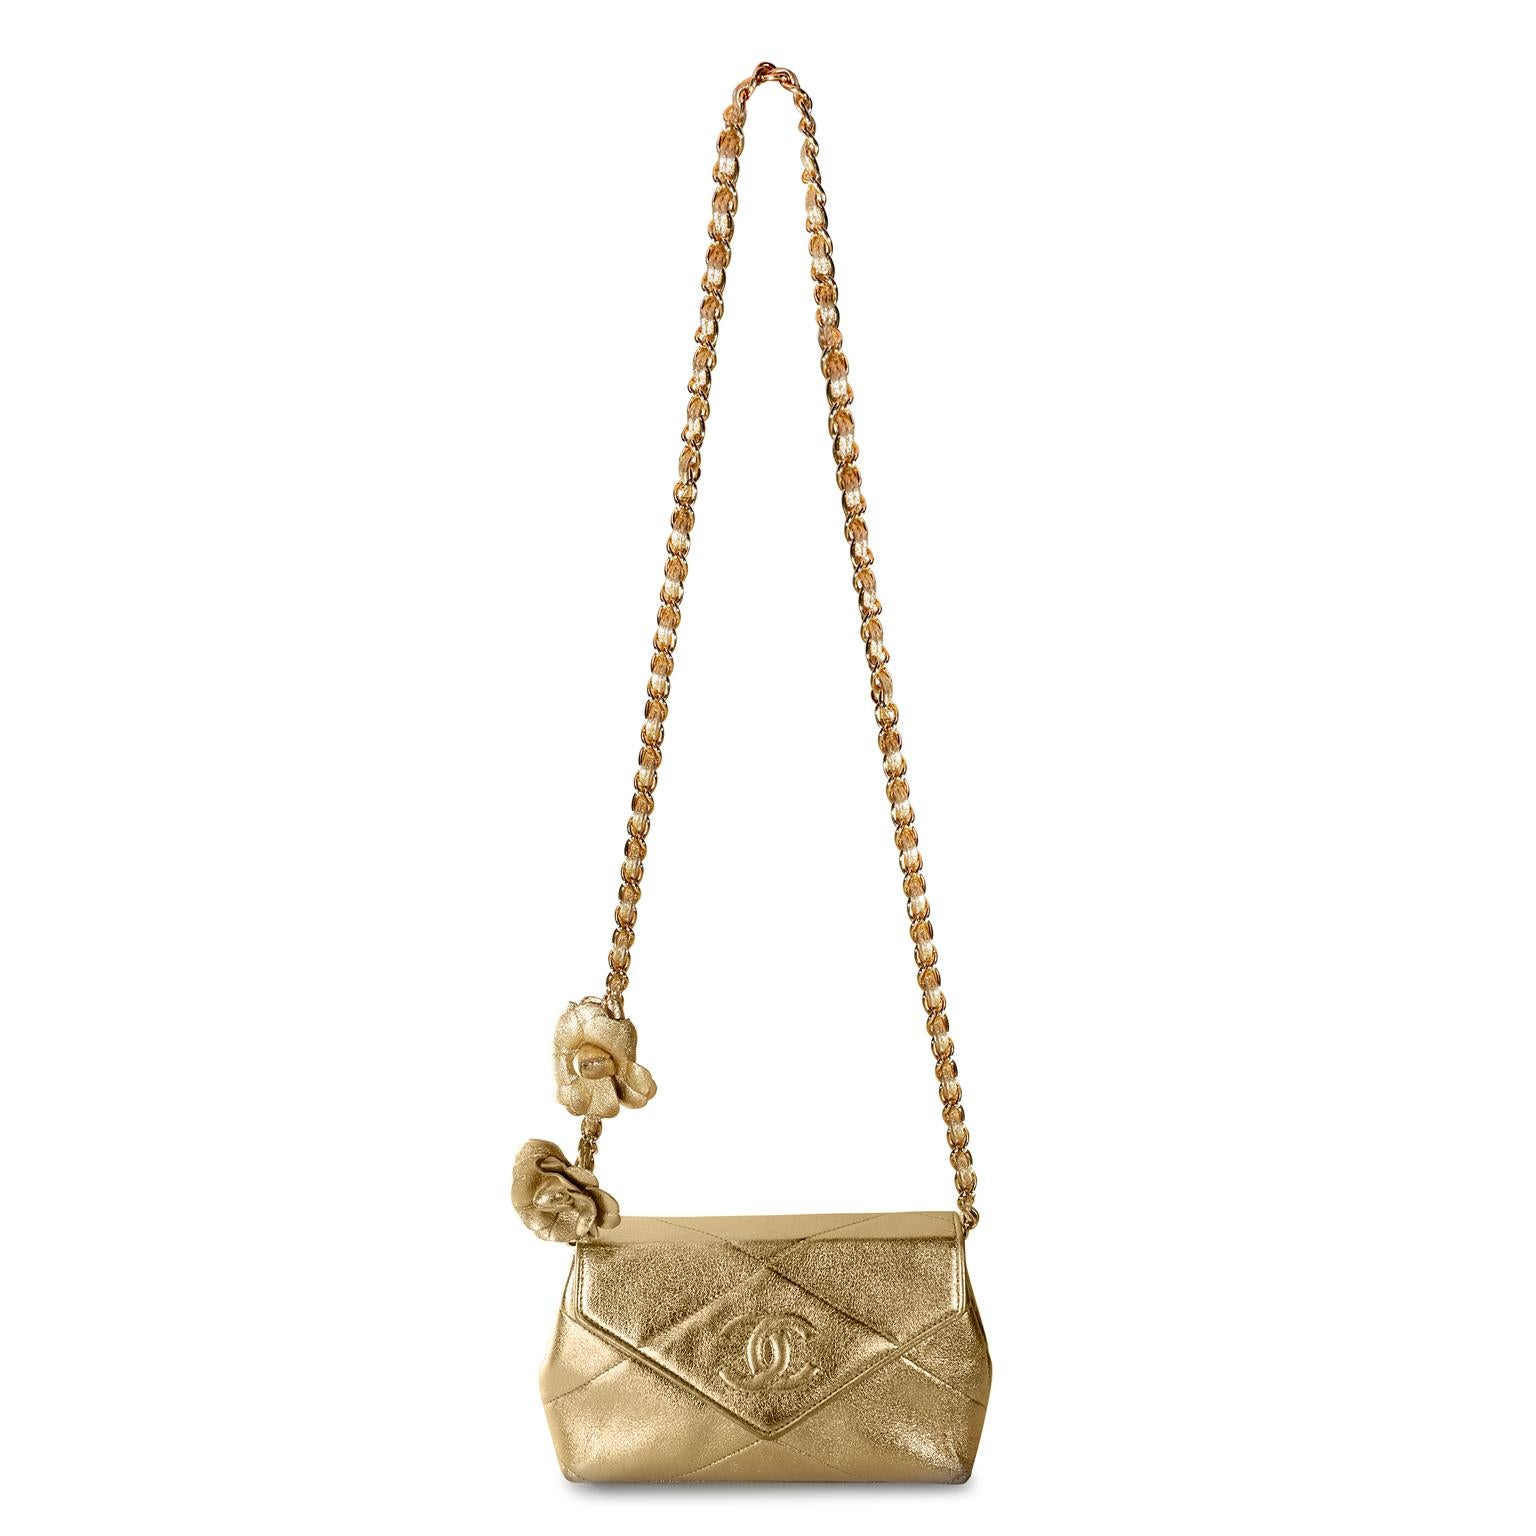 Chanel Gold Vintage Camellia Flower Evening Bag- excellent condition
 A rare style from the 1980’s in exquisite condition, it is a must have for collectors.
Gold metallic leather small  envelope flap bag.  Tonally stitched interlocking CC on front